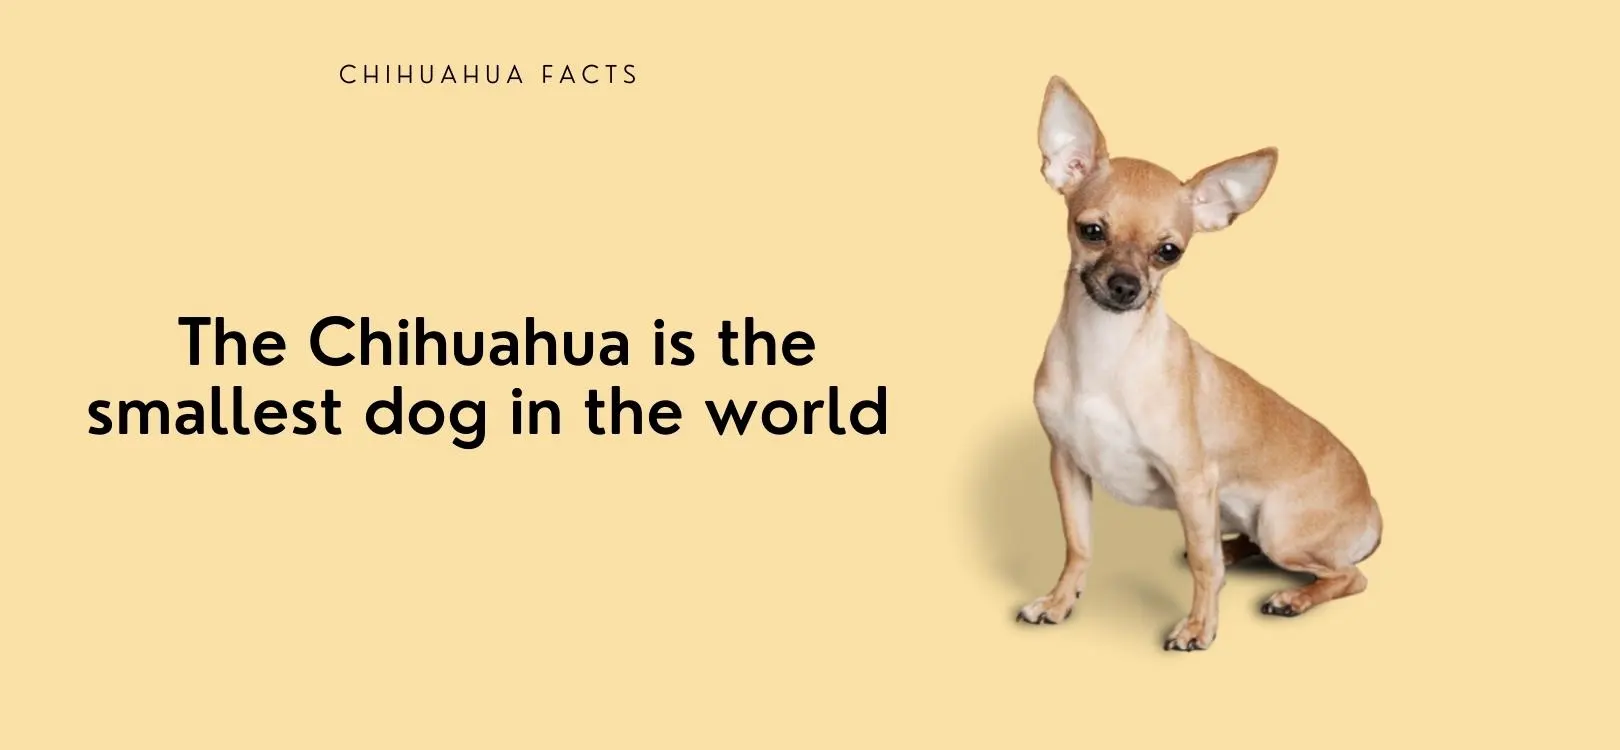 what's the smallest dog in the world